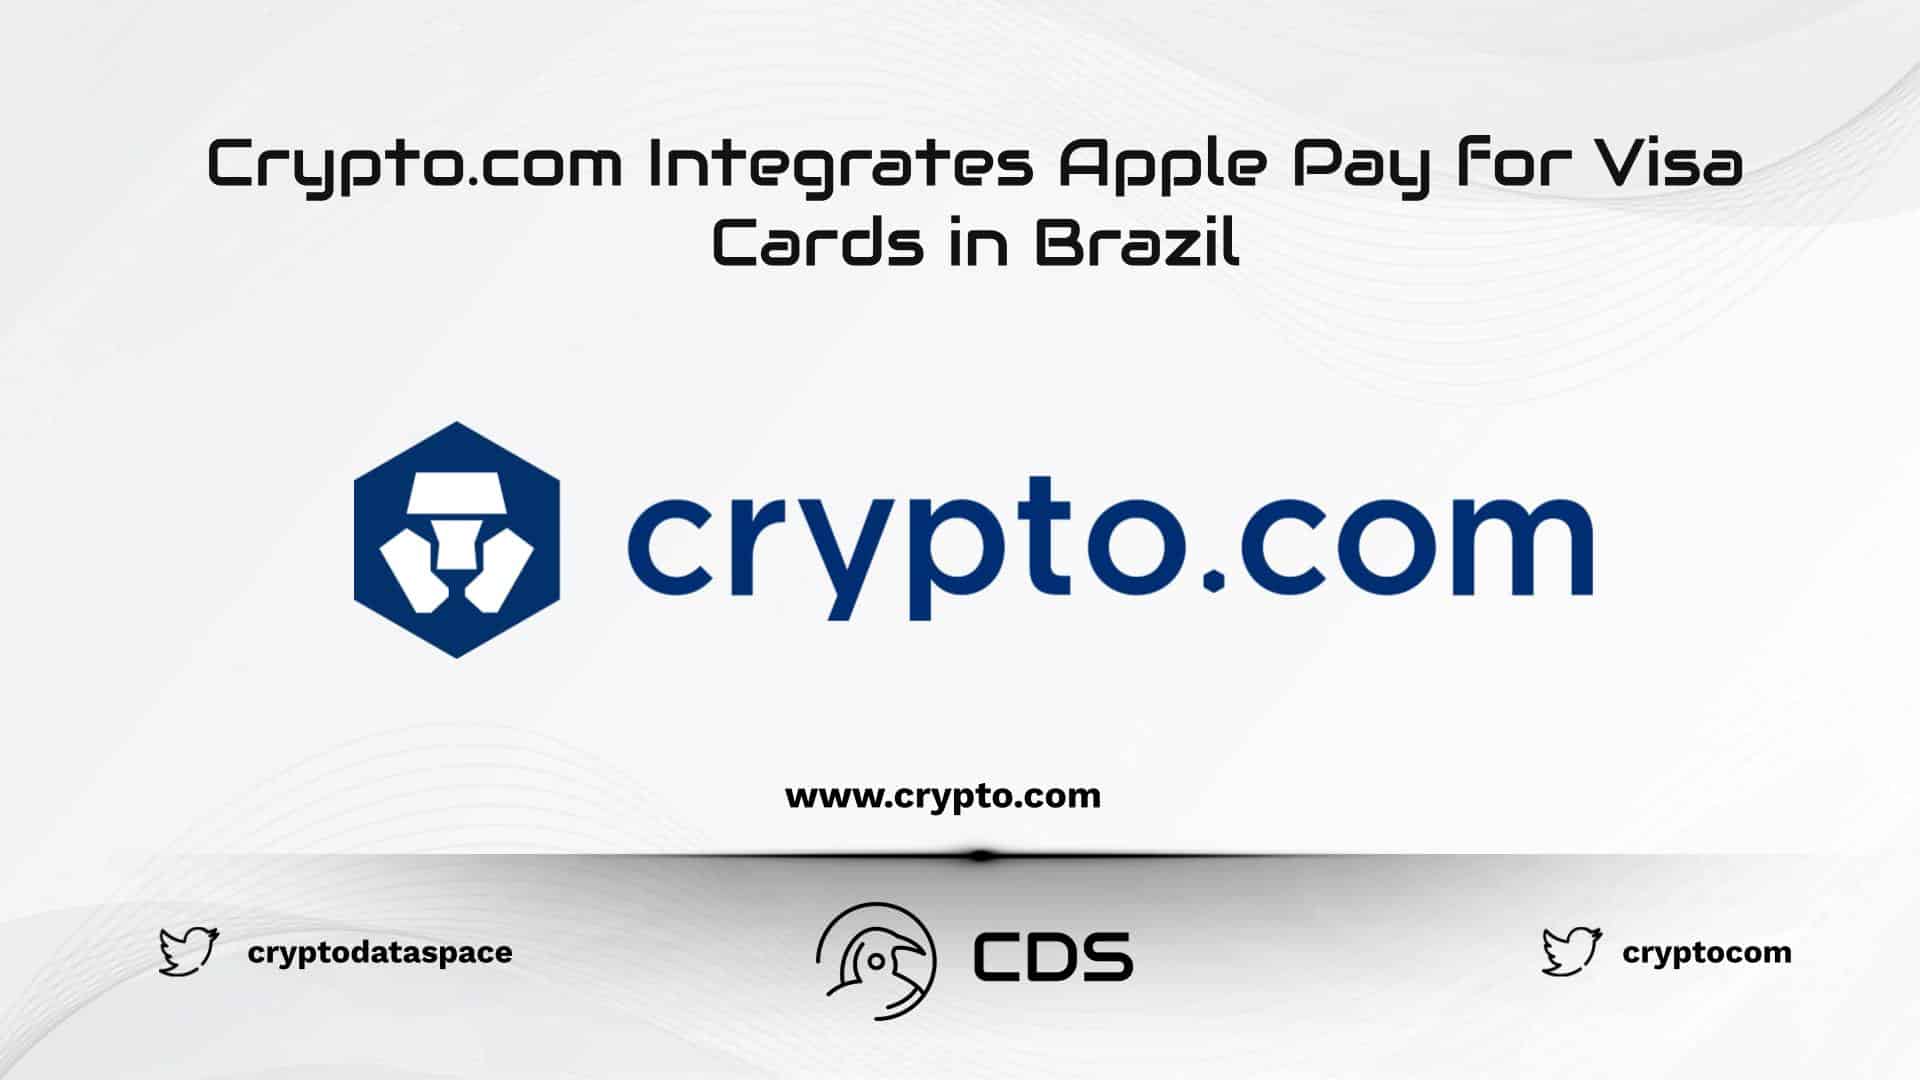 Crypto.com Integrates Apple Pay for Visa Cards in Brazil